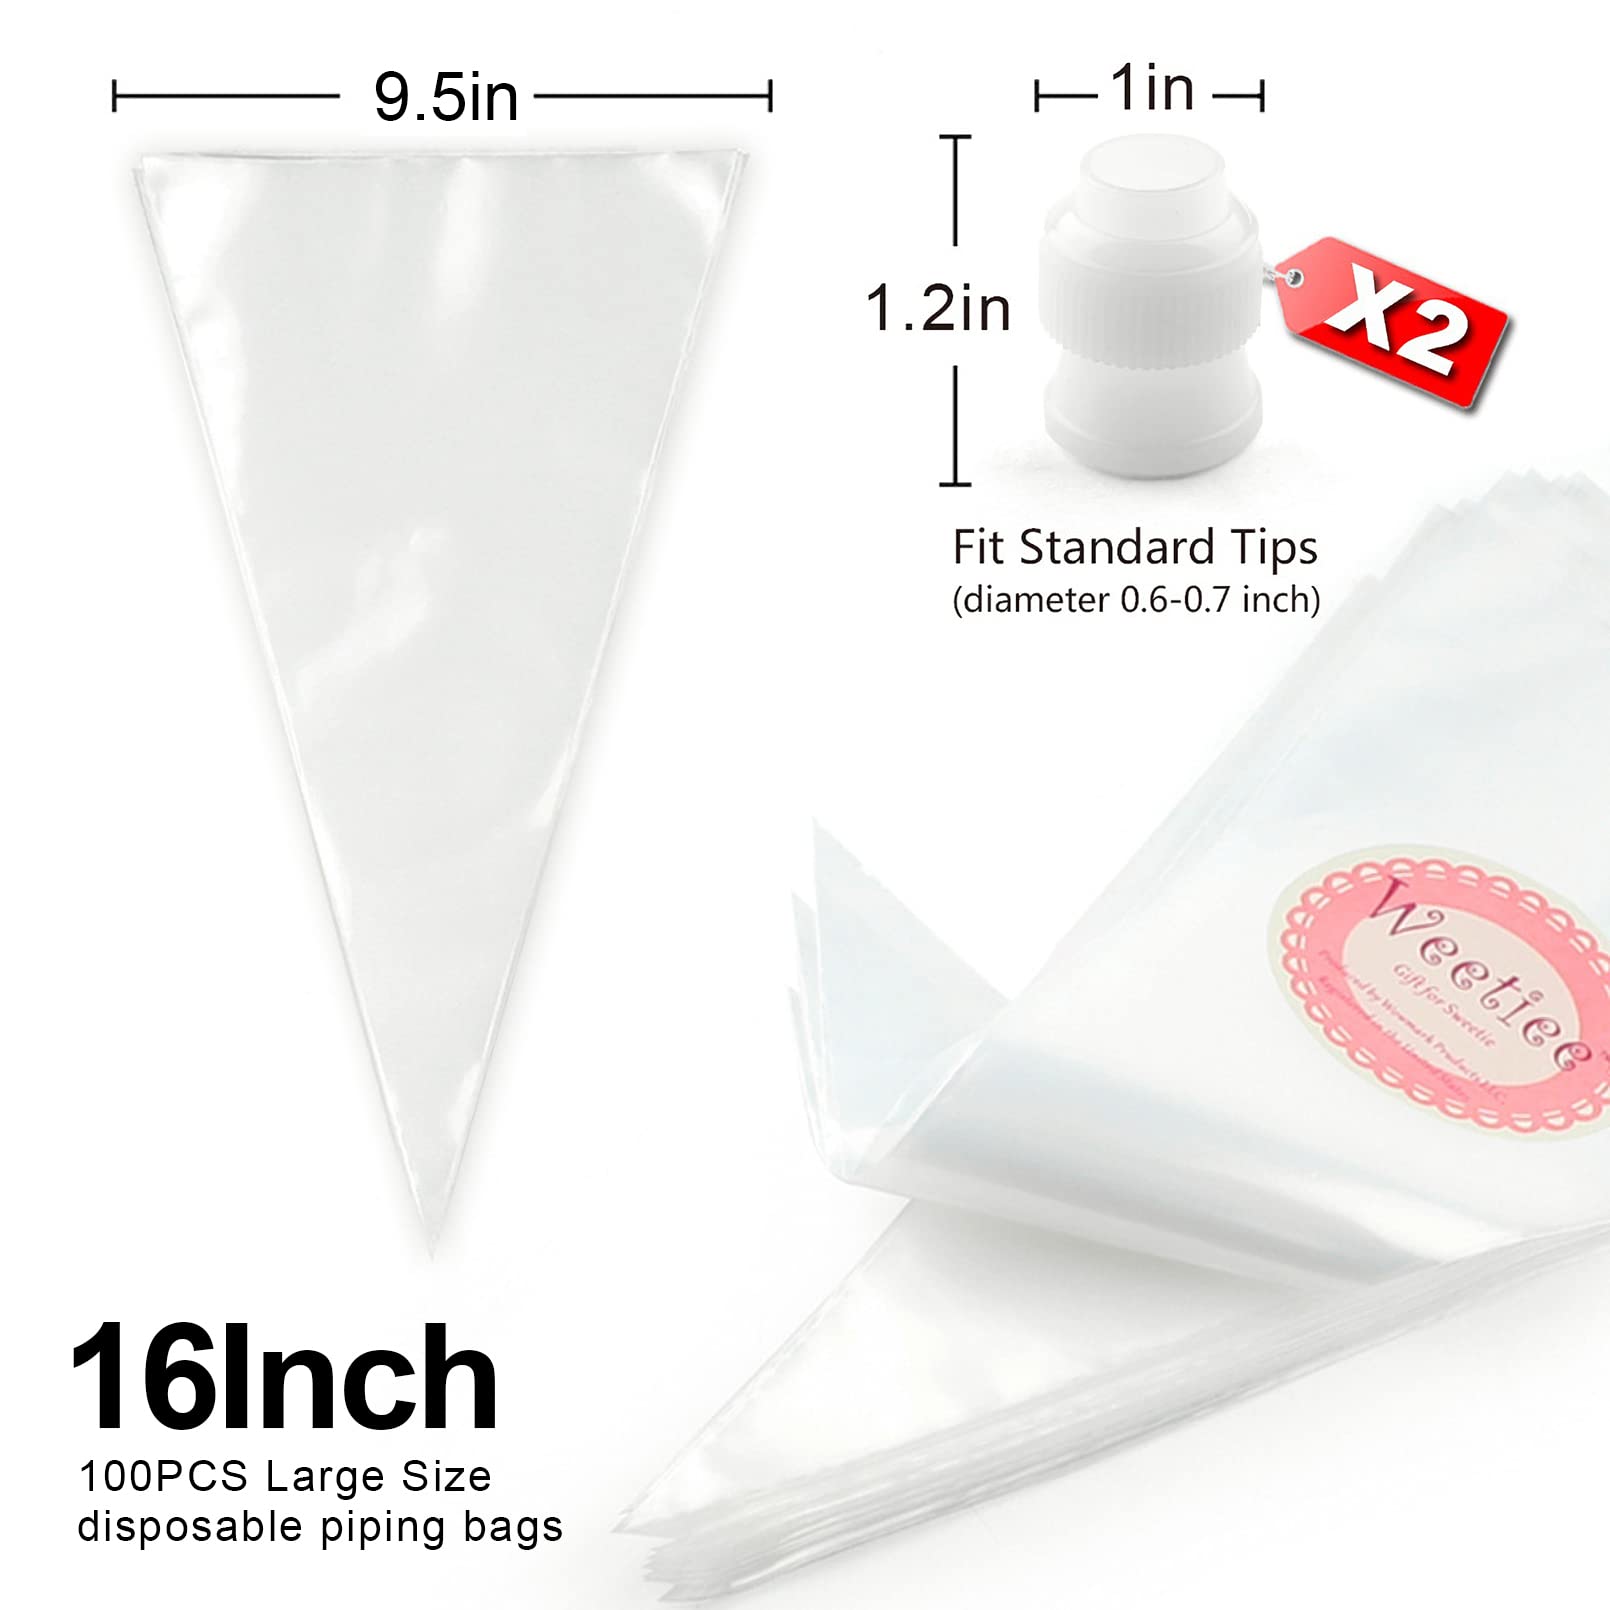 Weetiee Pastry Piping Bags -100 Pack-16-Inch Disposable Cake Decorating Bags Anti-Burst Cupcake Icing Bags for all Size Tips Couplers and Baking Cookies Candy Supplies Kits - Bonus 2 Couplers